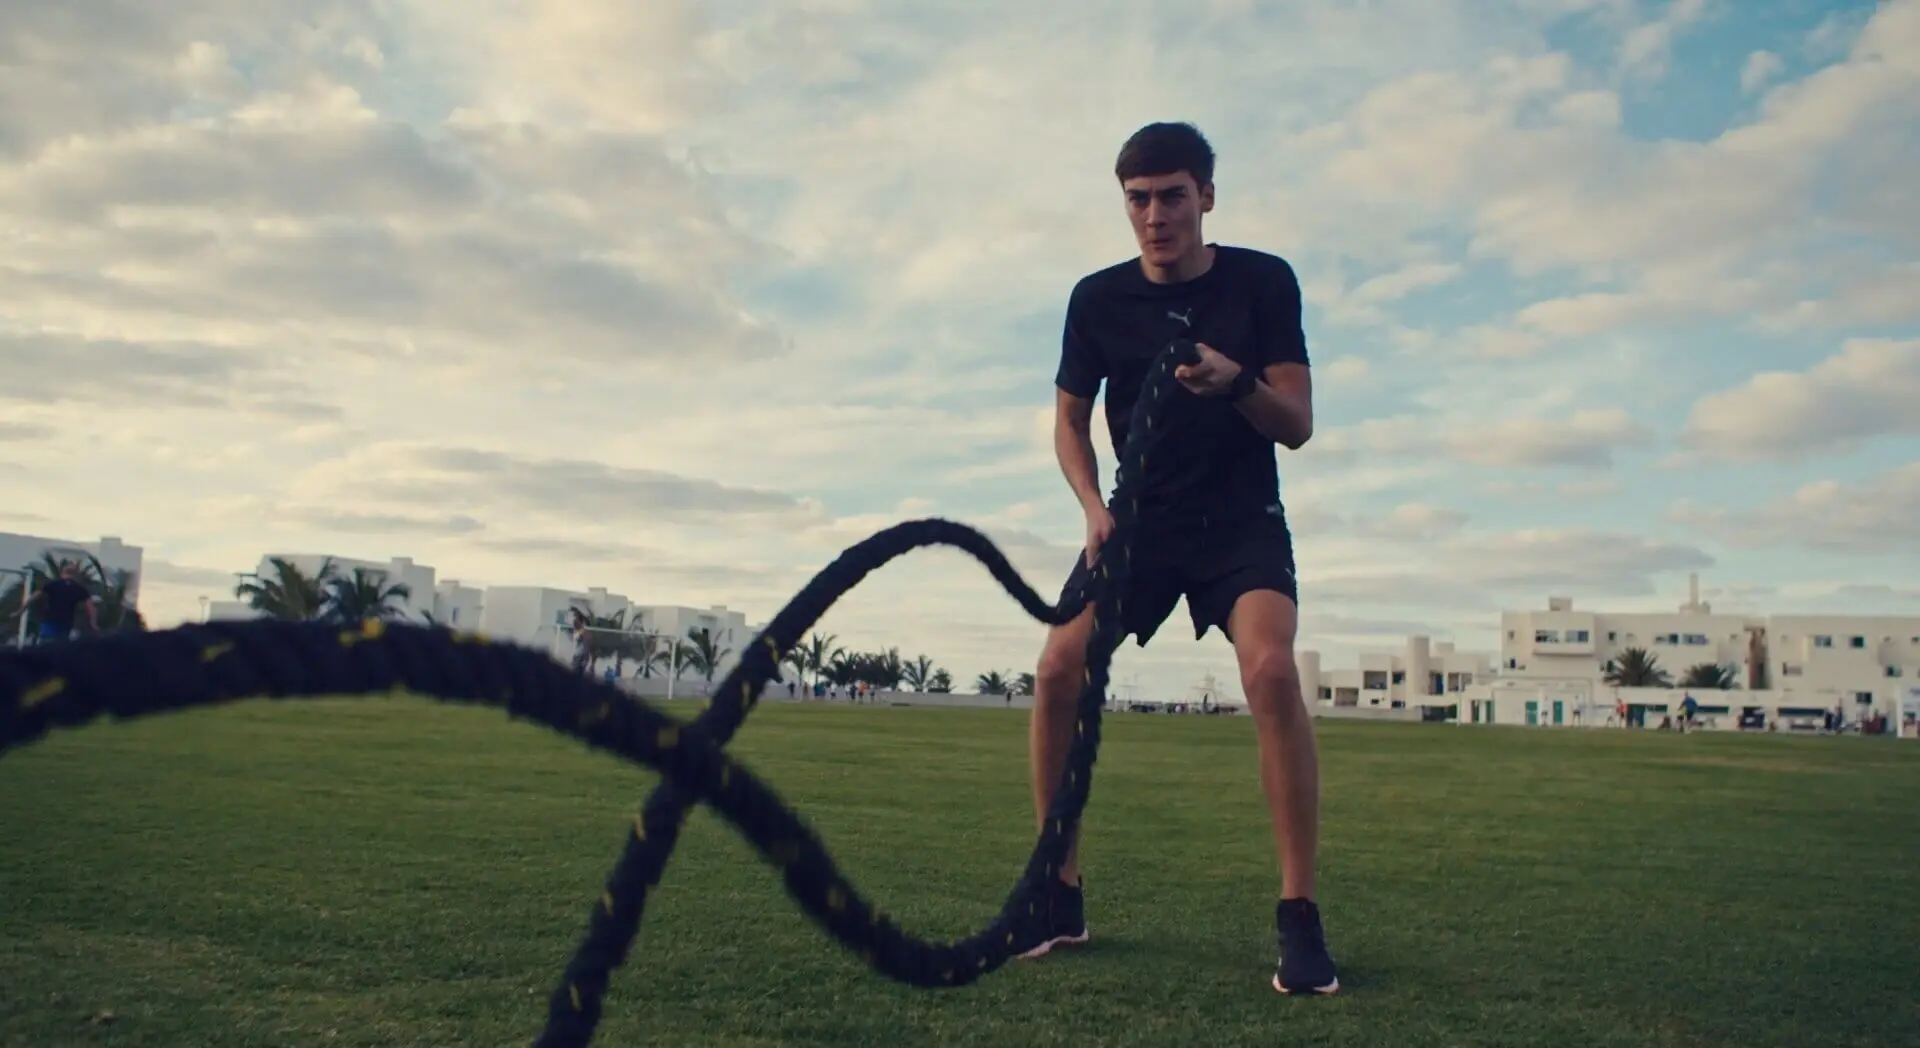 Screenshot from the Sky F1 TV series ' Next Generation' showcasing formula 1 driver, George Russel, exercising using battle ropes.